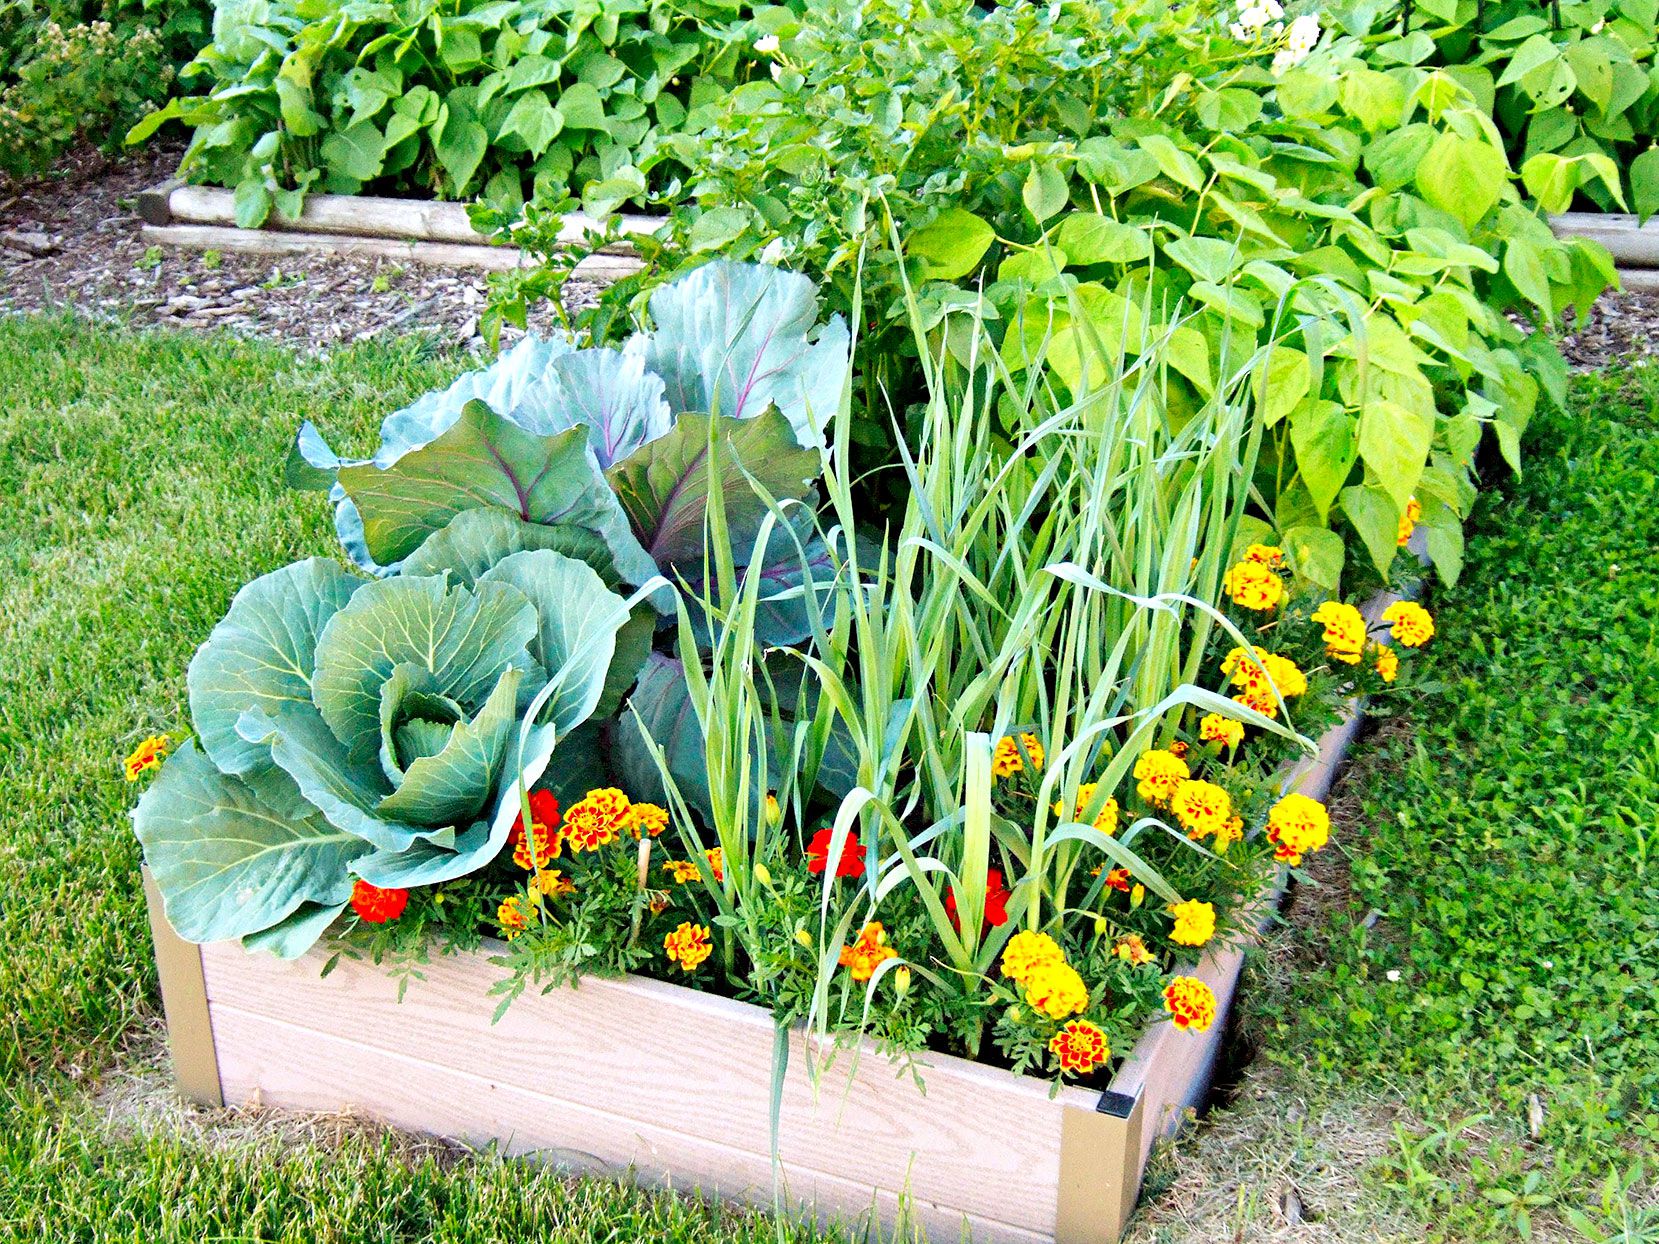 How to Plant Garden Vegetables